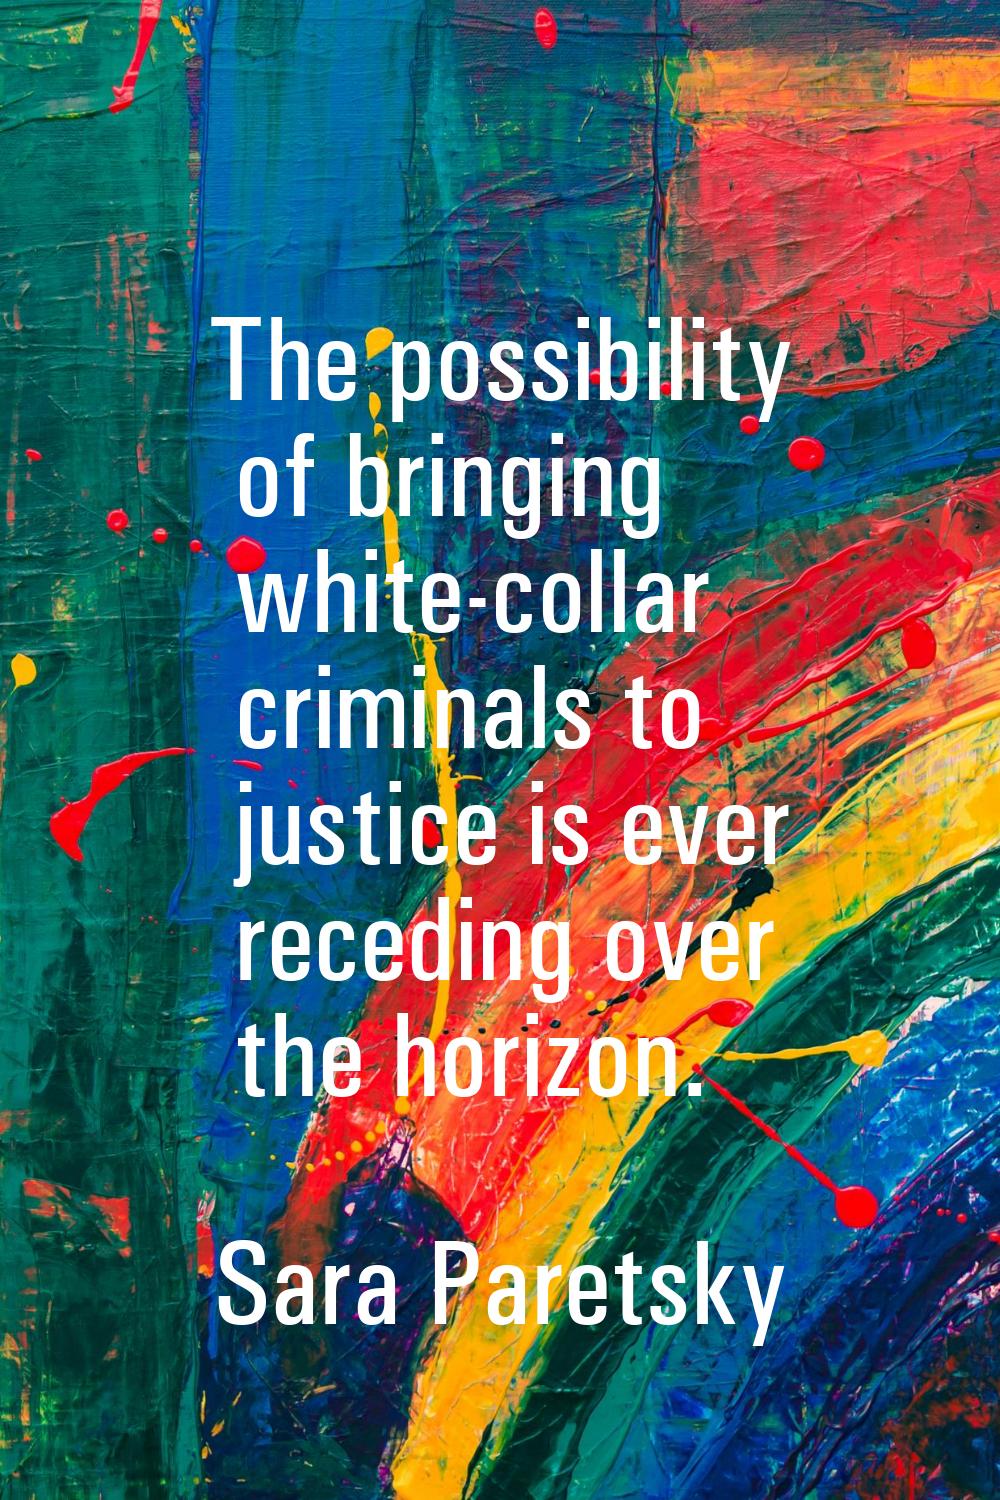 The possibility of bringing white-collar criminals to justice is ever receding over the horizon.